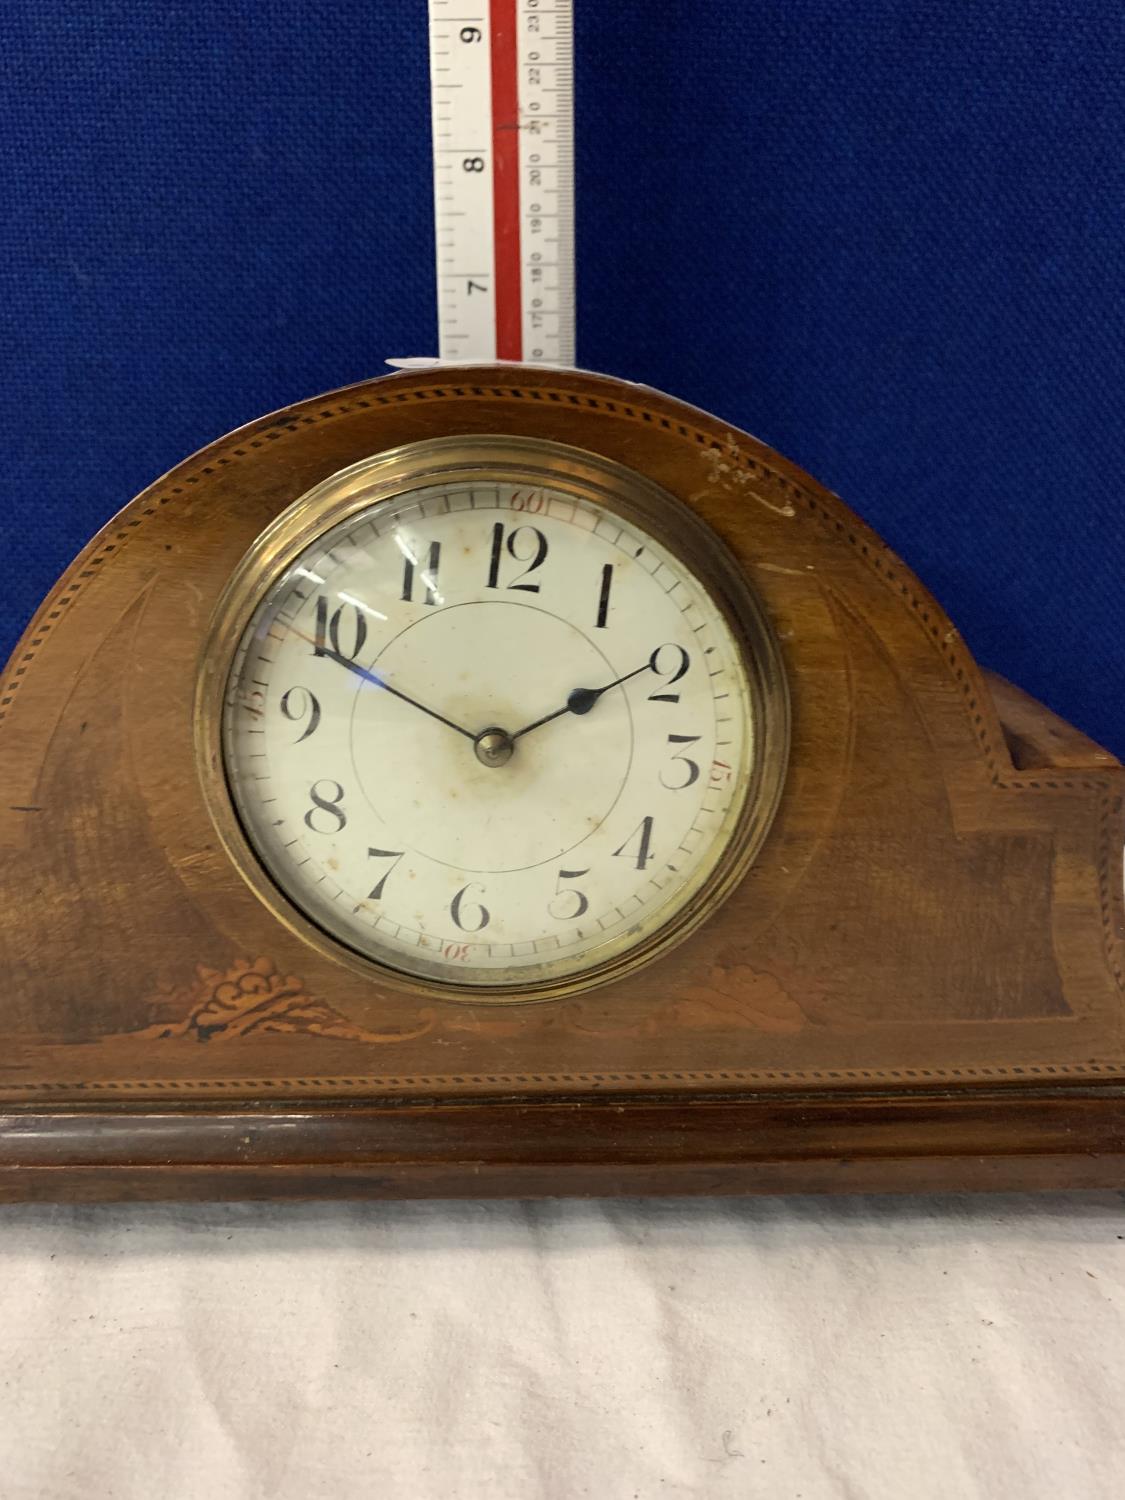 A WOODEN MANTLE CLOCK WITH INLAY DETAIL AND BRASS FACE SURROUND - Image 5 of 5